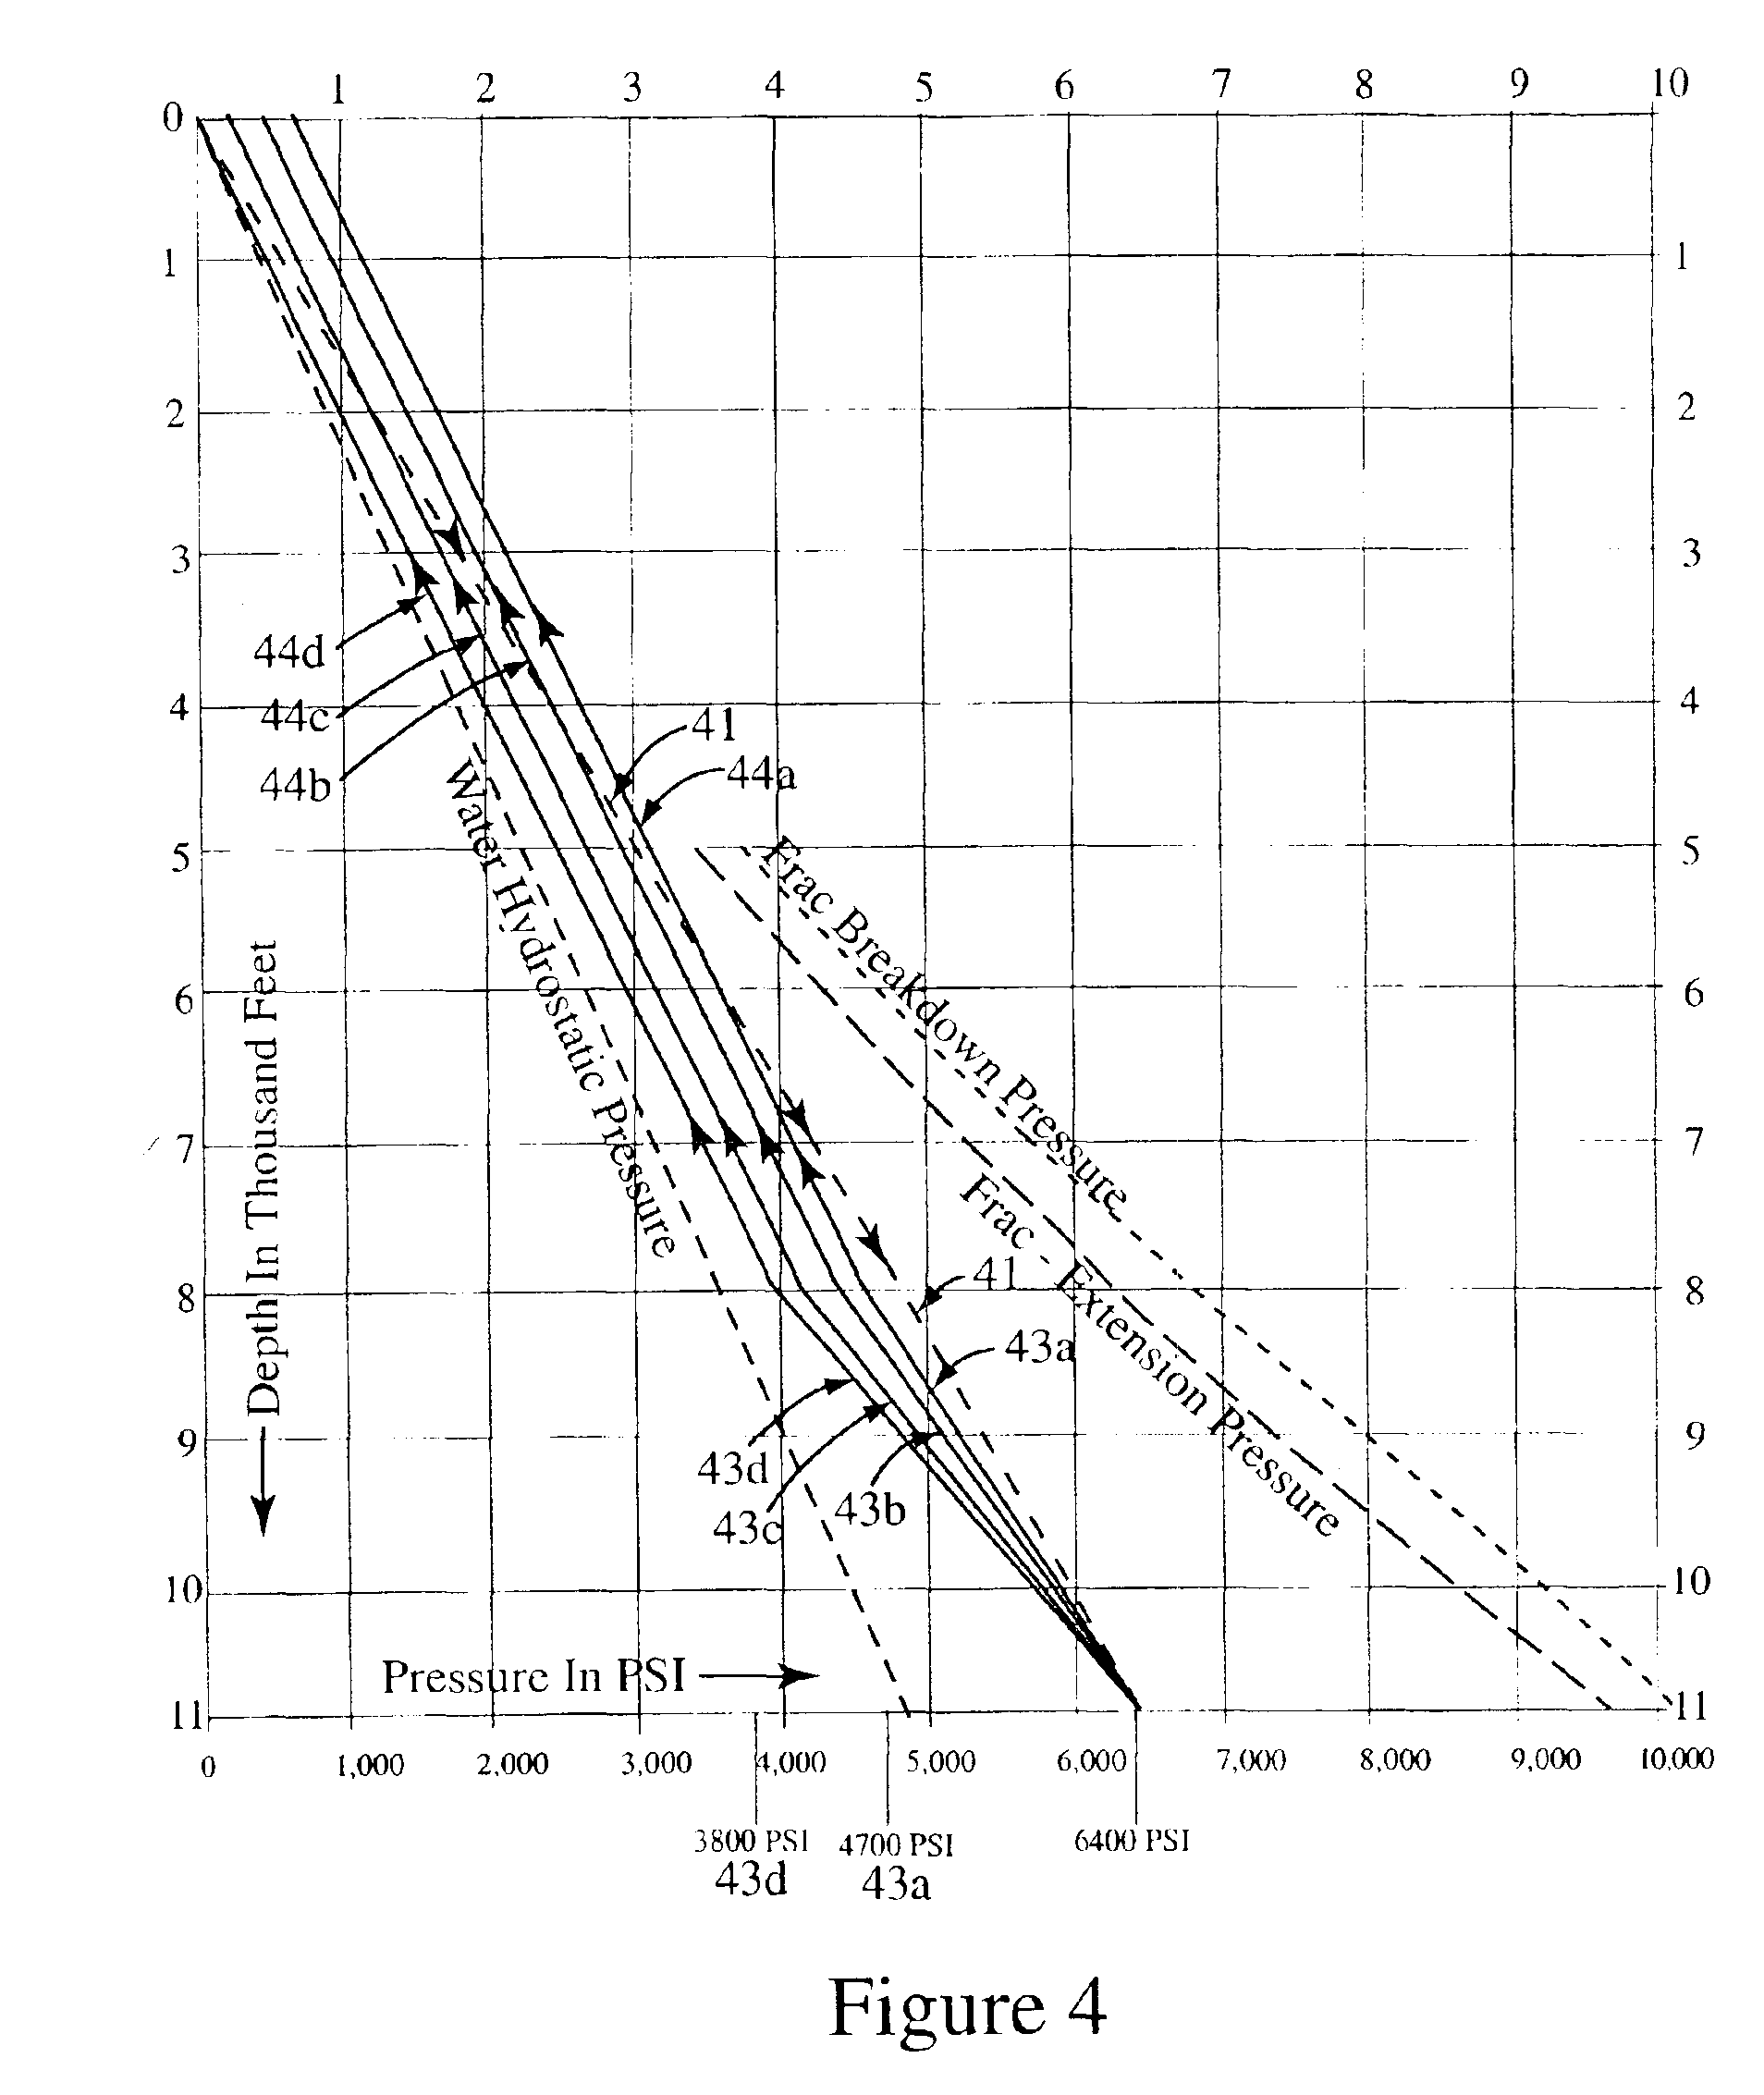 Method for upward growth of a hydraulic fracture along a well bore sandpacked annulus